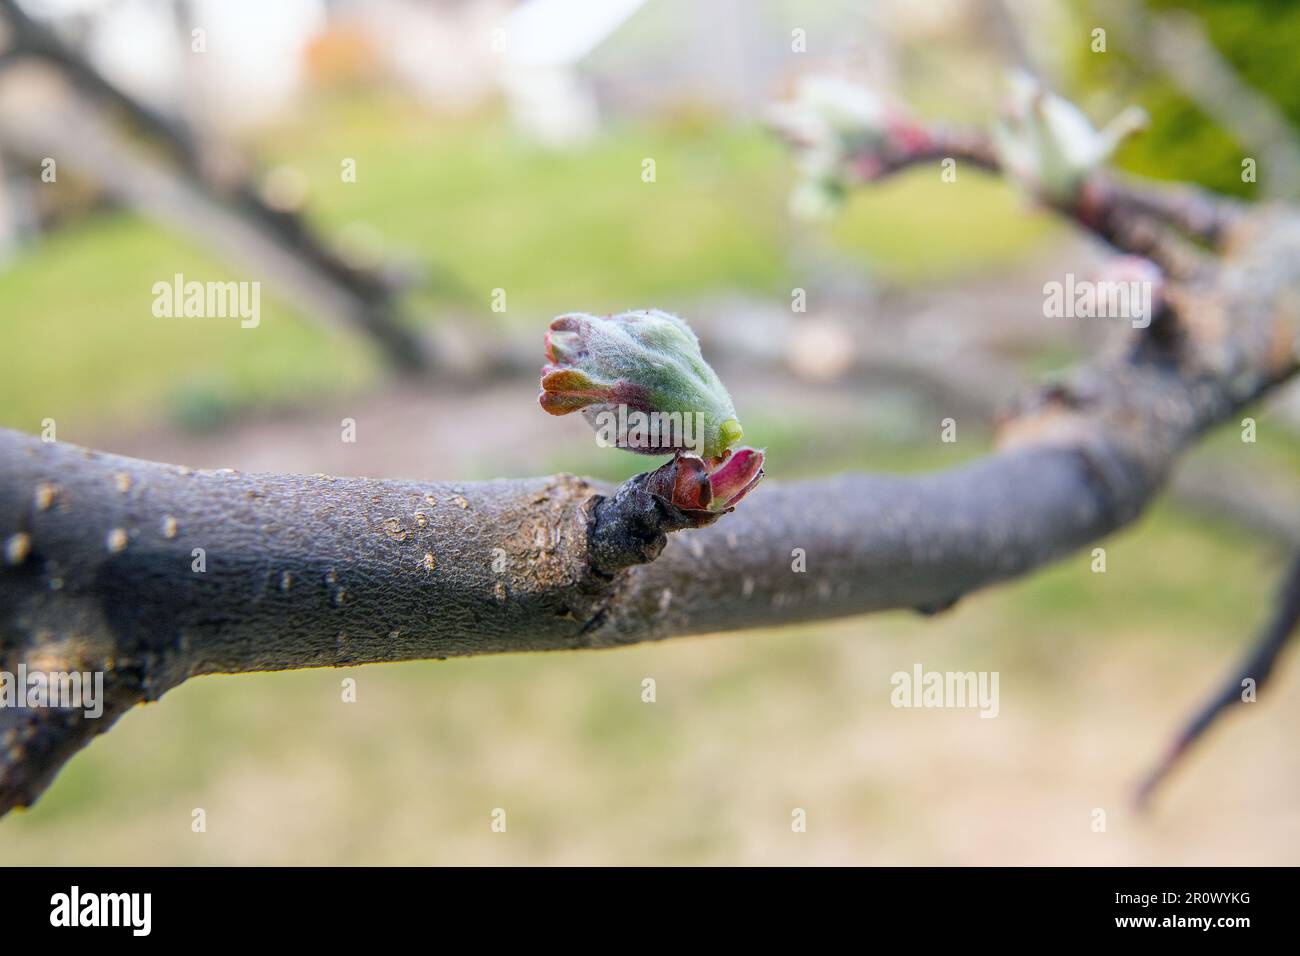 Green apple buds of flowers and leaves, green cluster, opening in spring sunshine on the tree Stock Photo